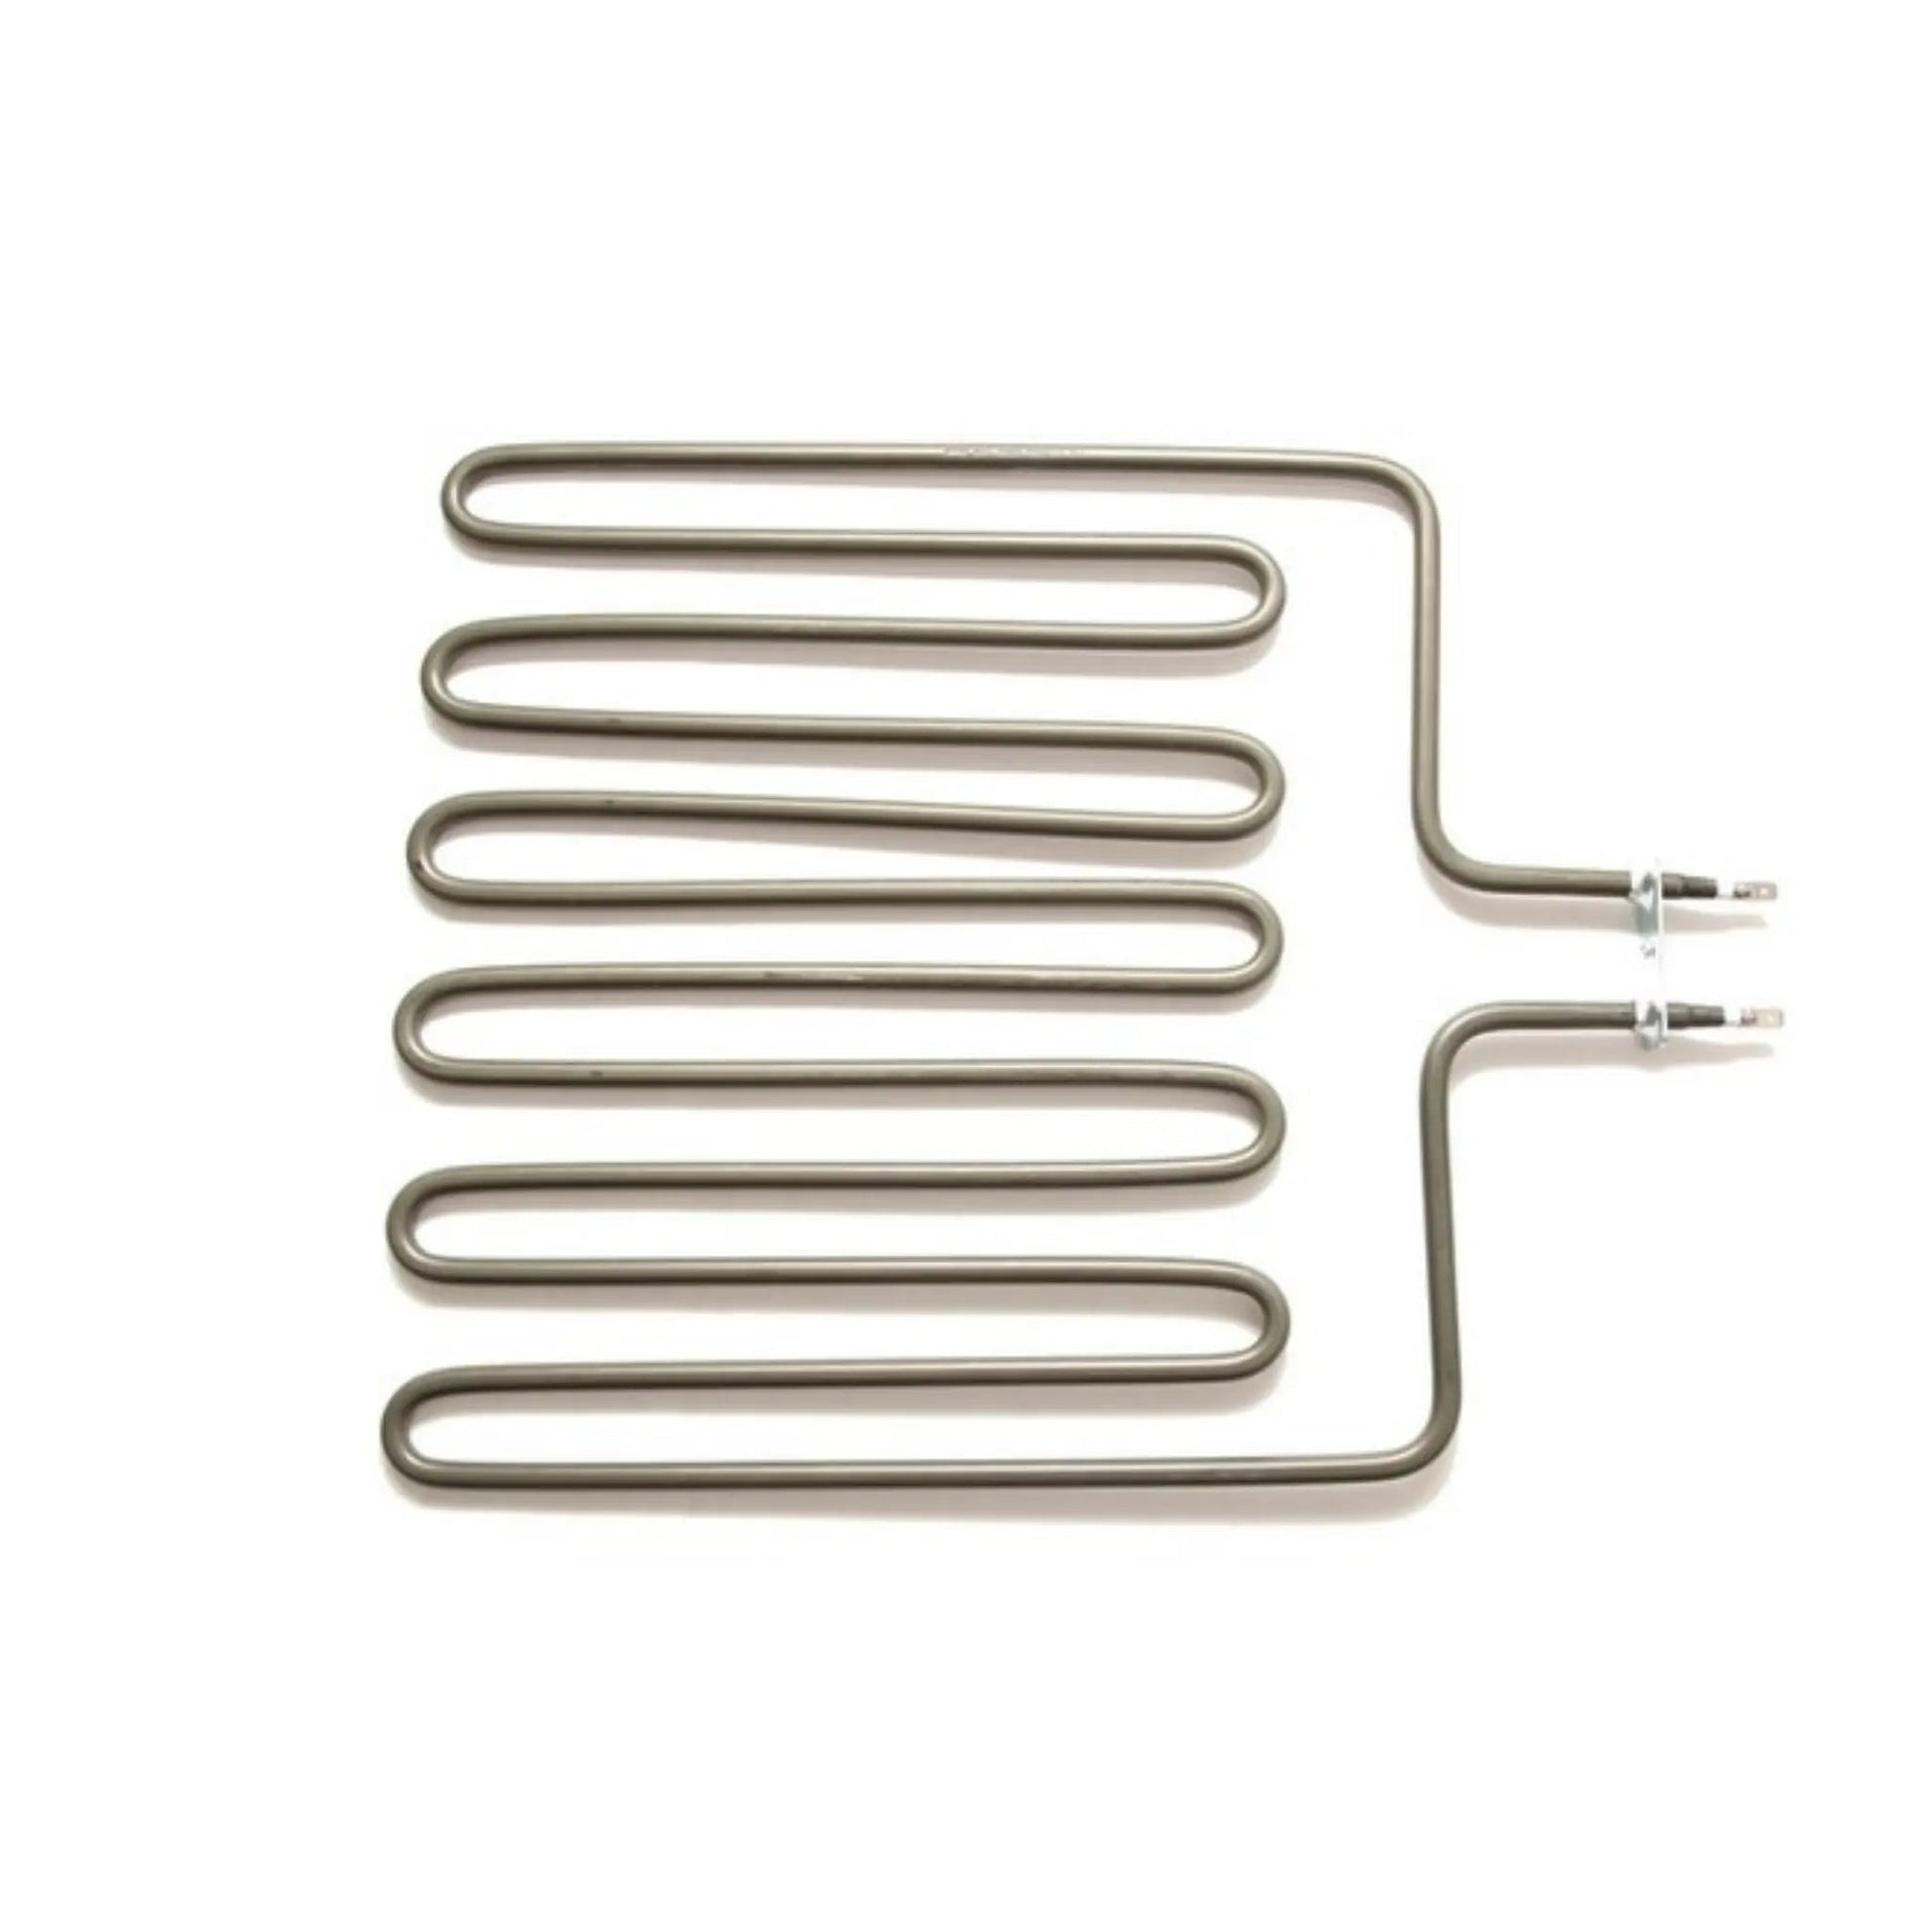 Narvi Electric Heater Replacement Element (3000w) for 9kw Heater (NM, NC, Stonet, Slim) Heating Element | Finnmark Sauna